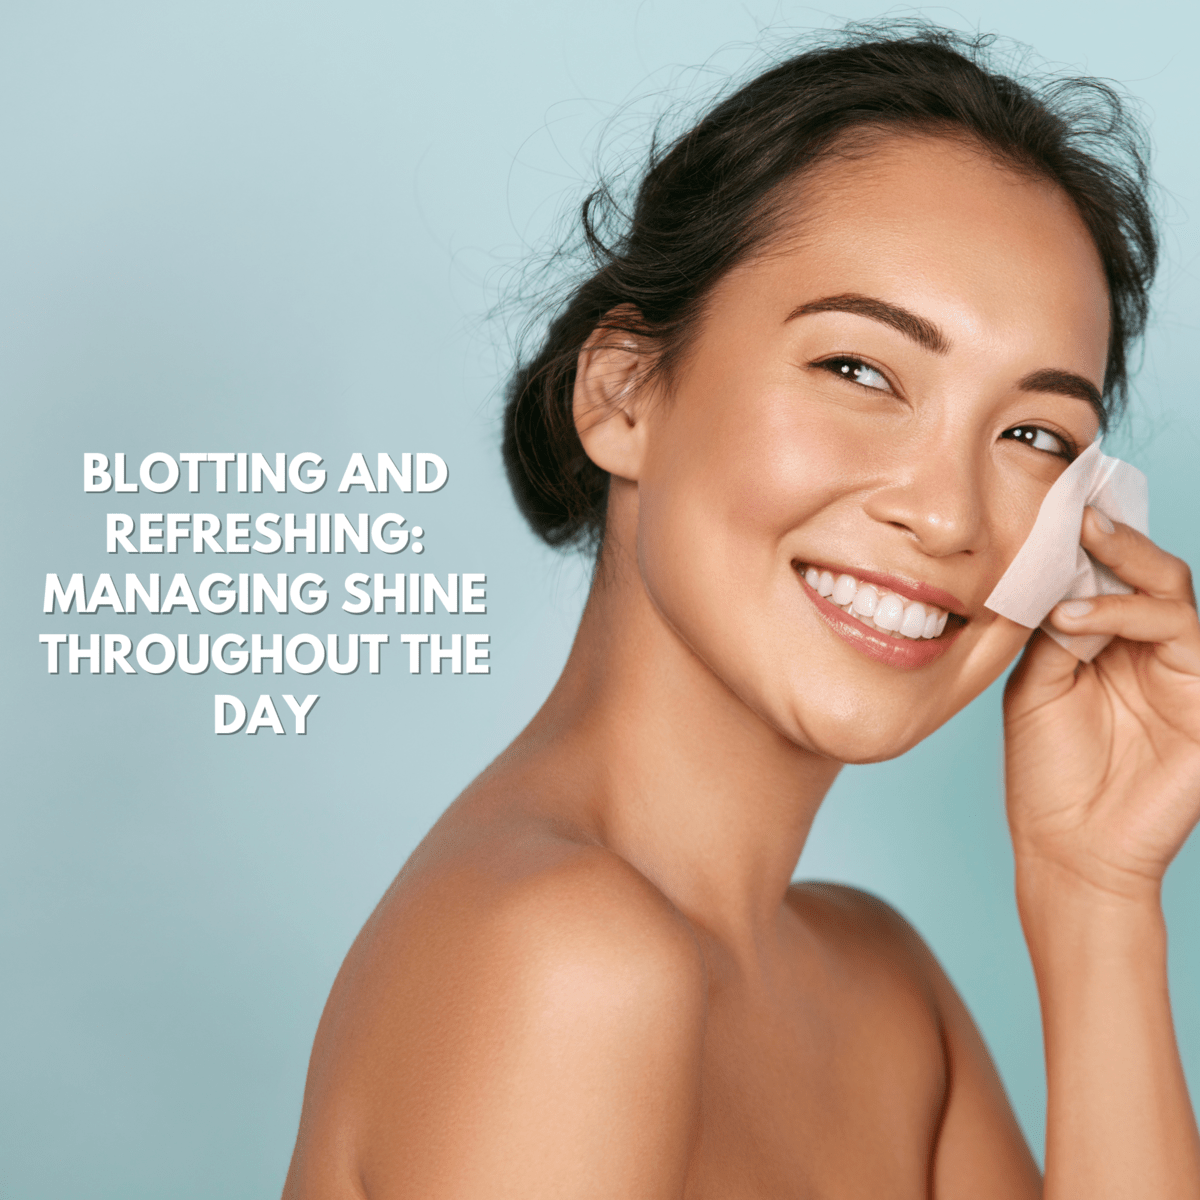 Blotting and Refreshing: Managing Shine Throughout the Day